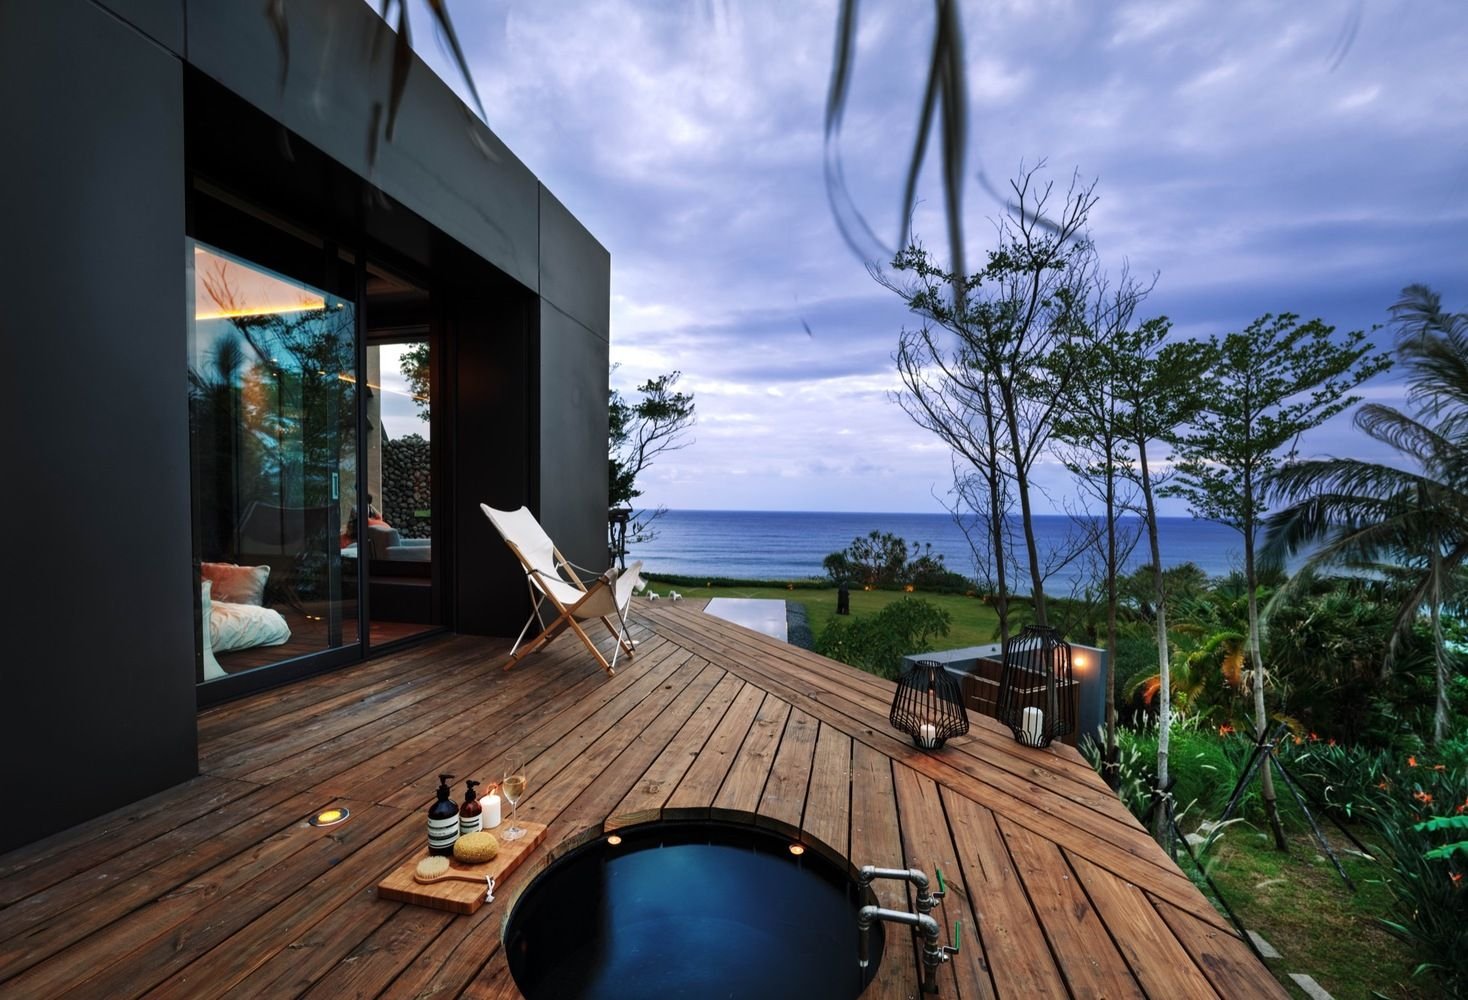 Unforgettable stone house excellent ocean and nature atmosphere